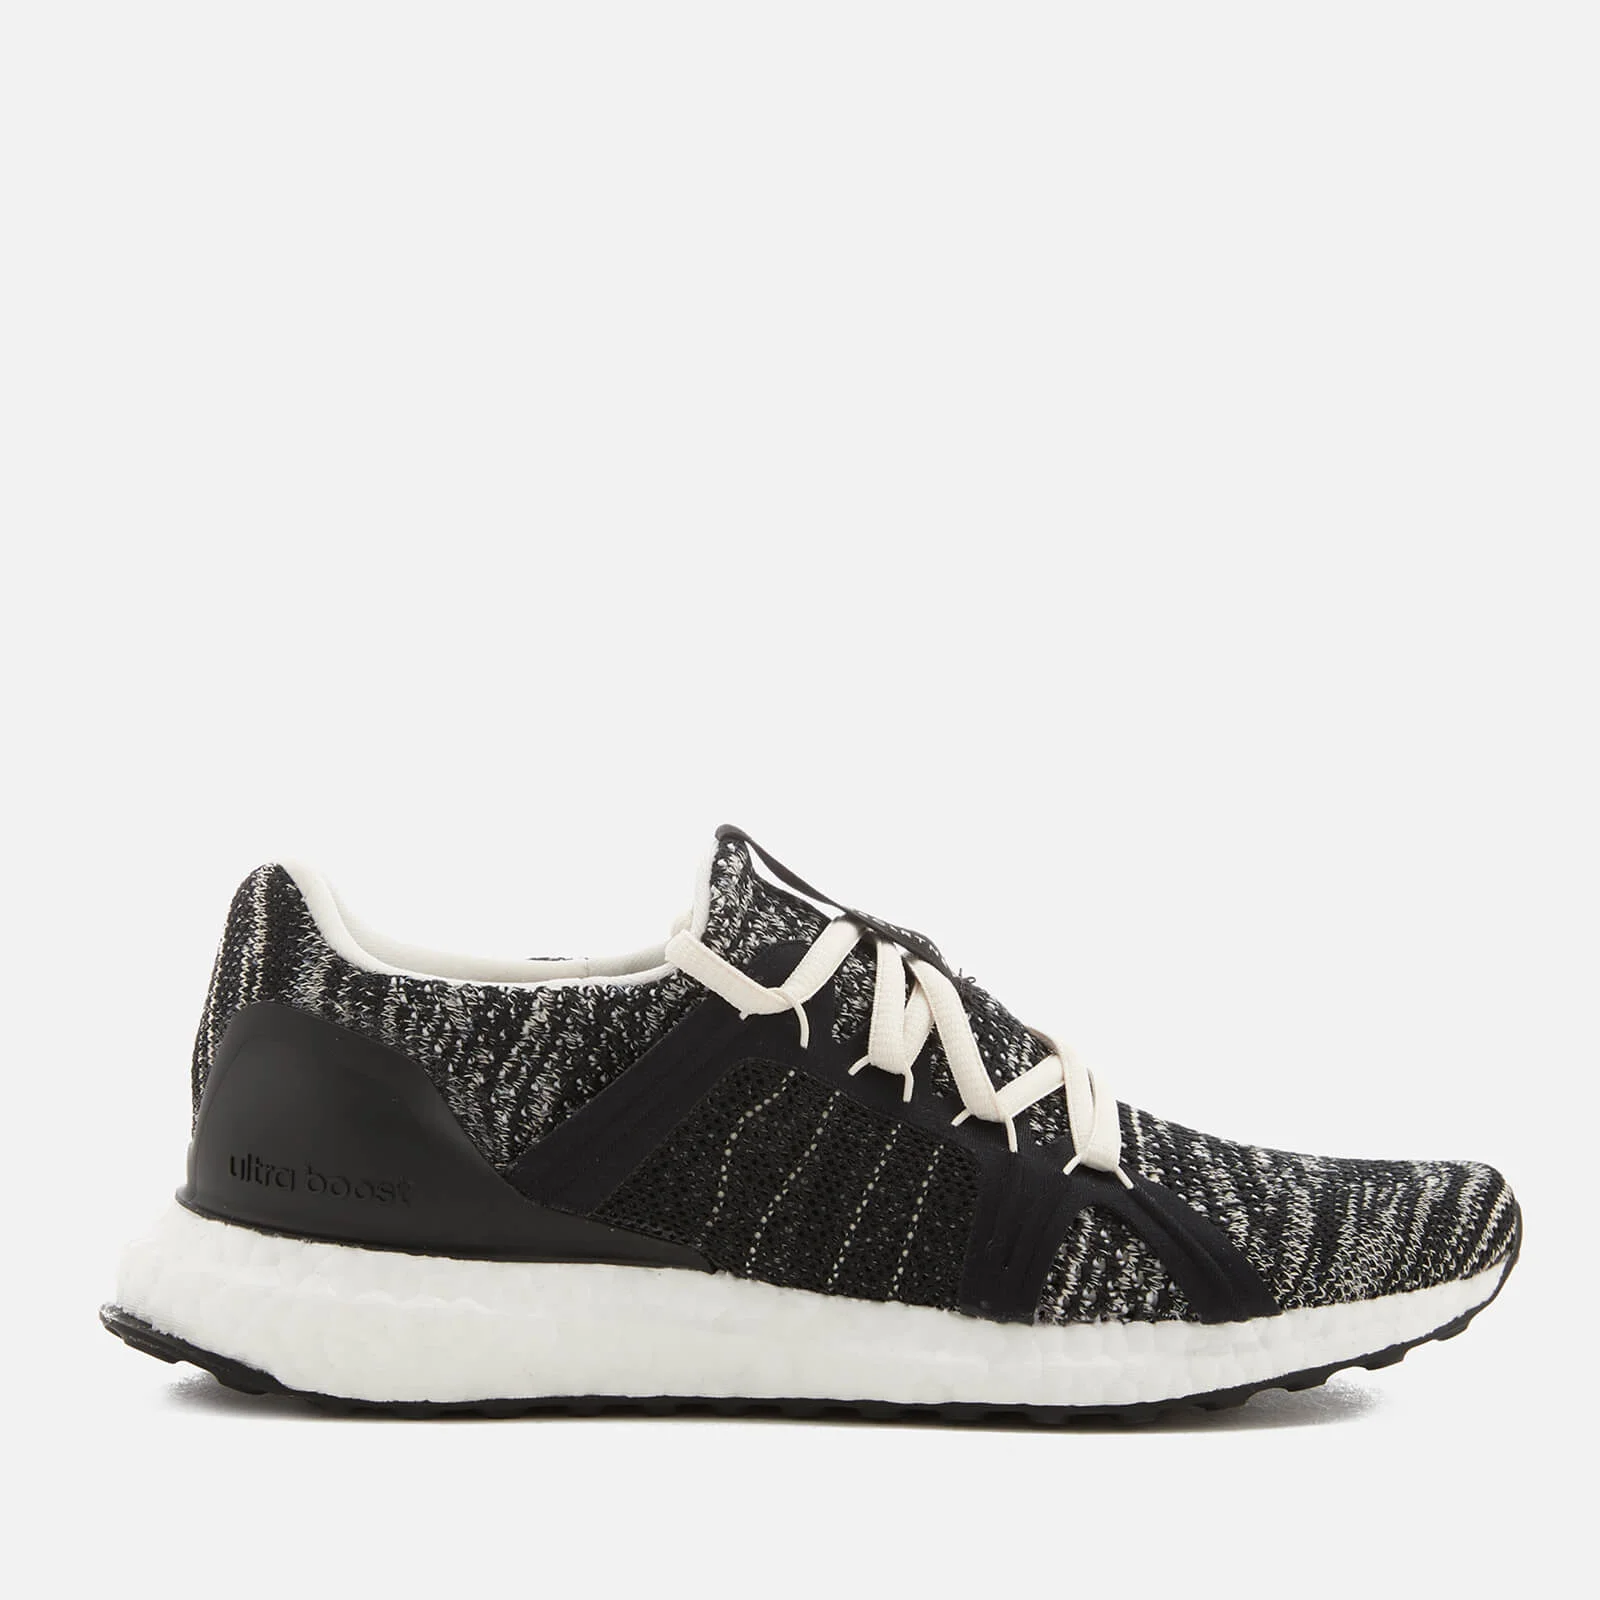 adidas by Stella McCartney Women's Ultraboost Parley Trainers - Core Black/White Image 1